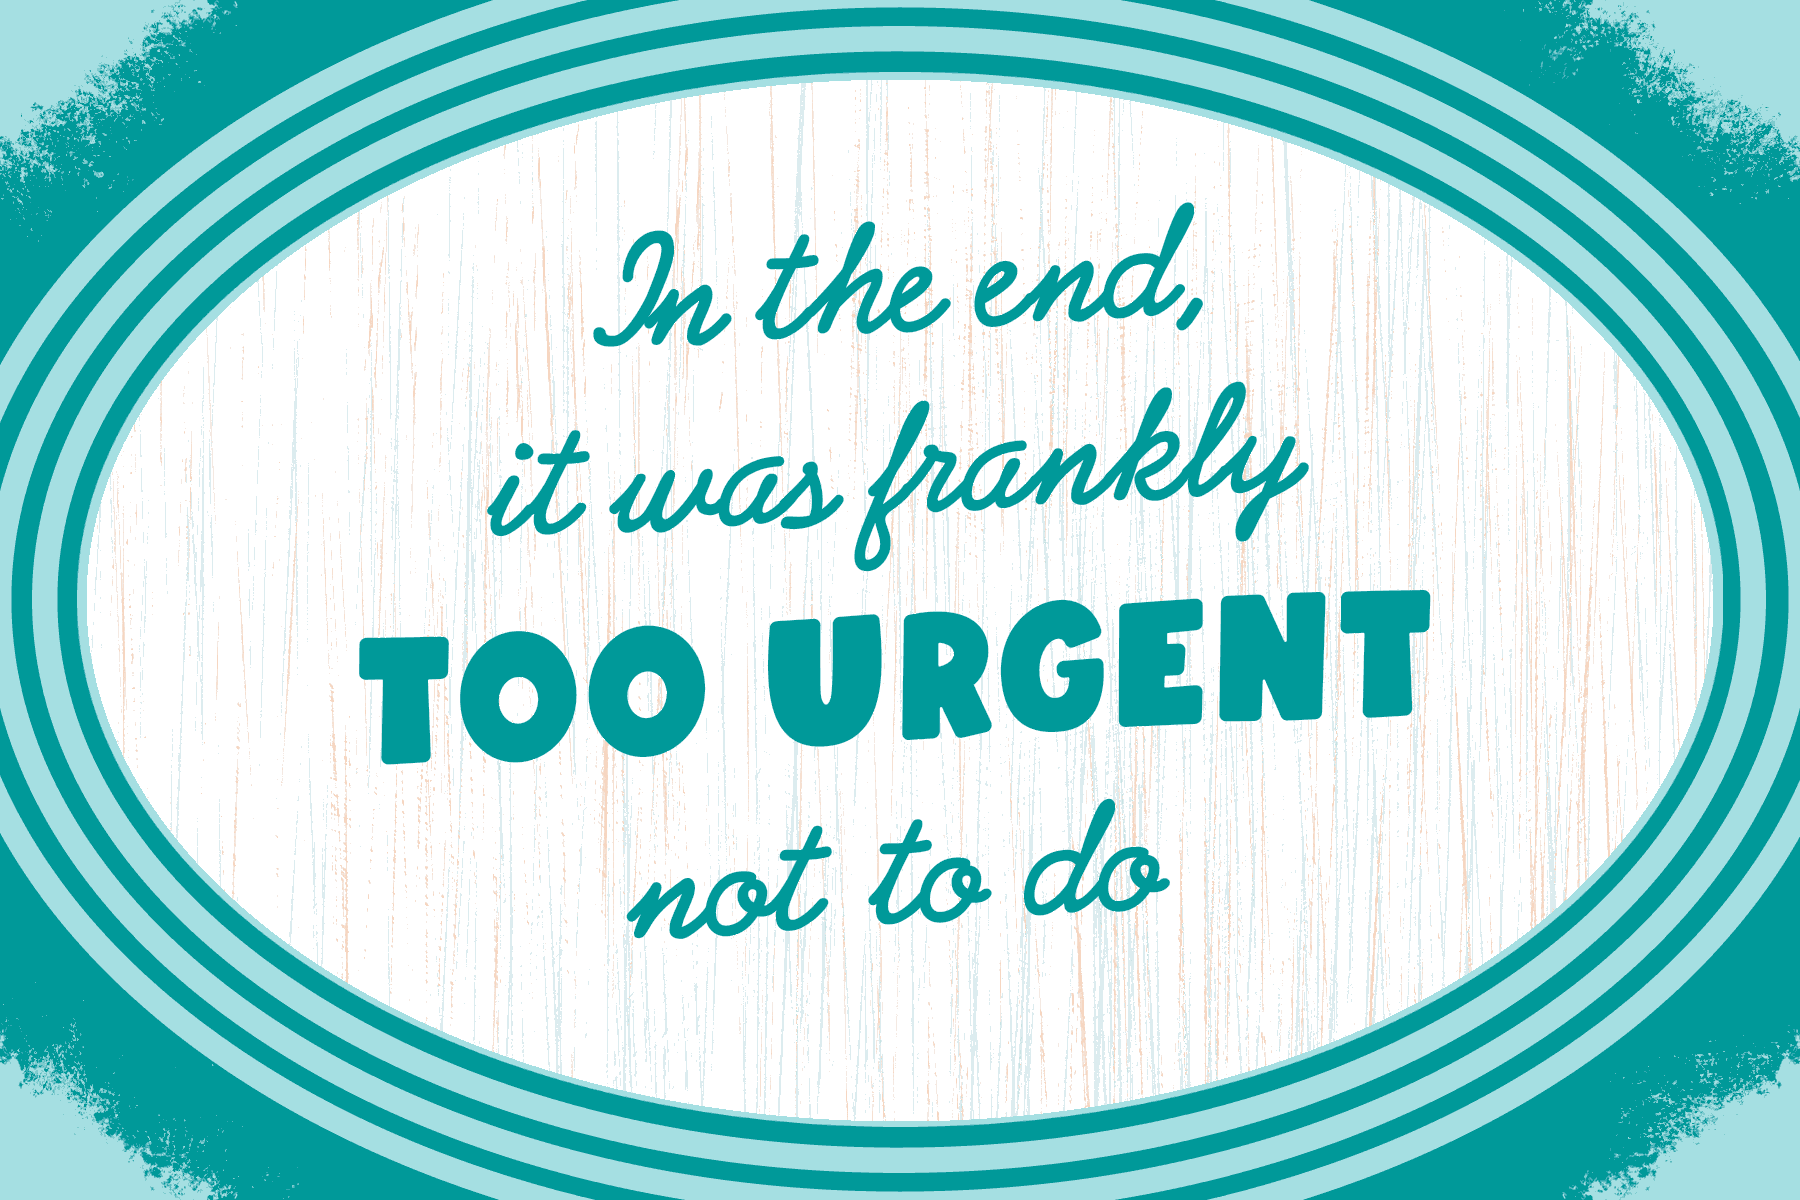 A moving gif of the words "In the end, it was frankly too urgent not to do" with a red line underneath